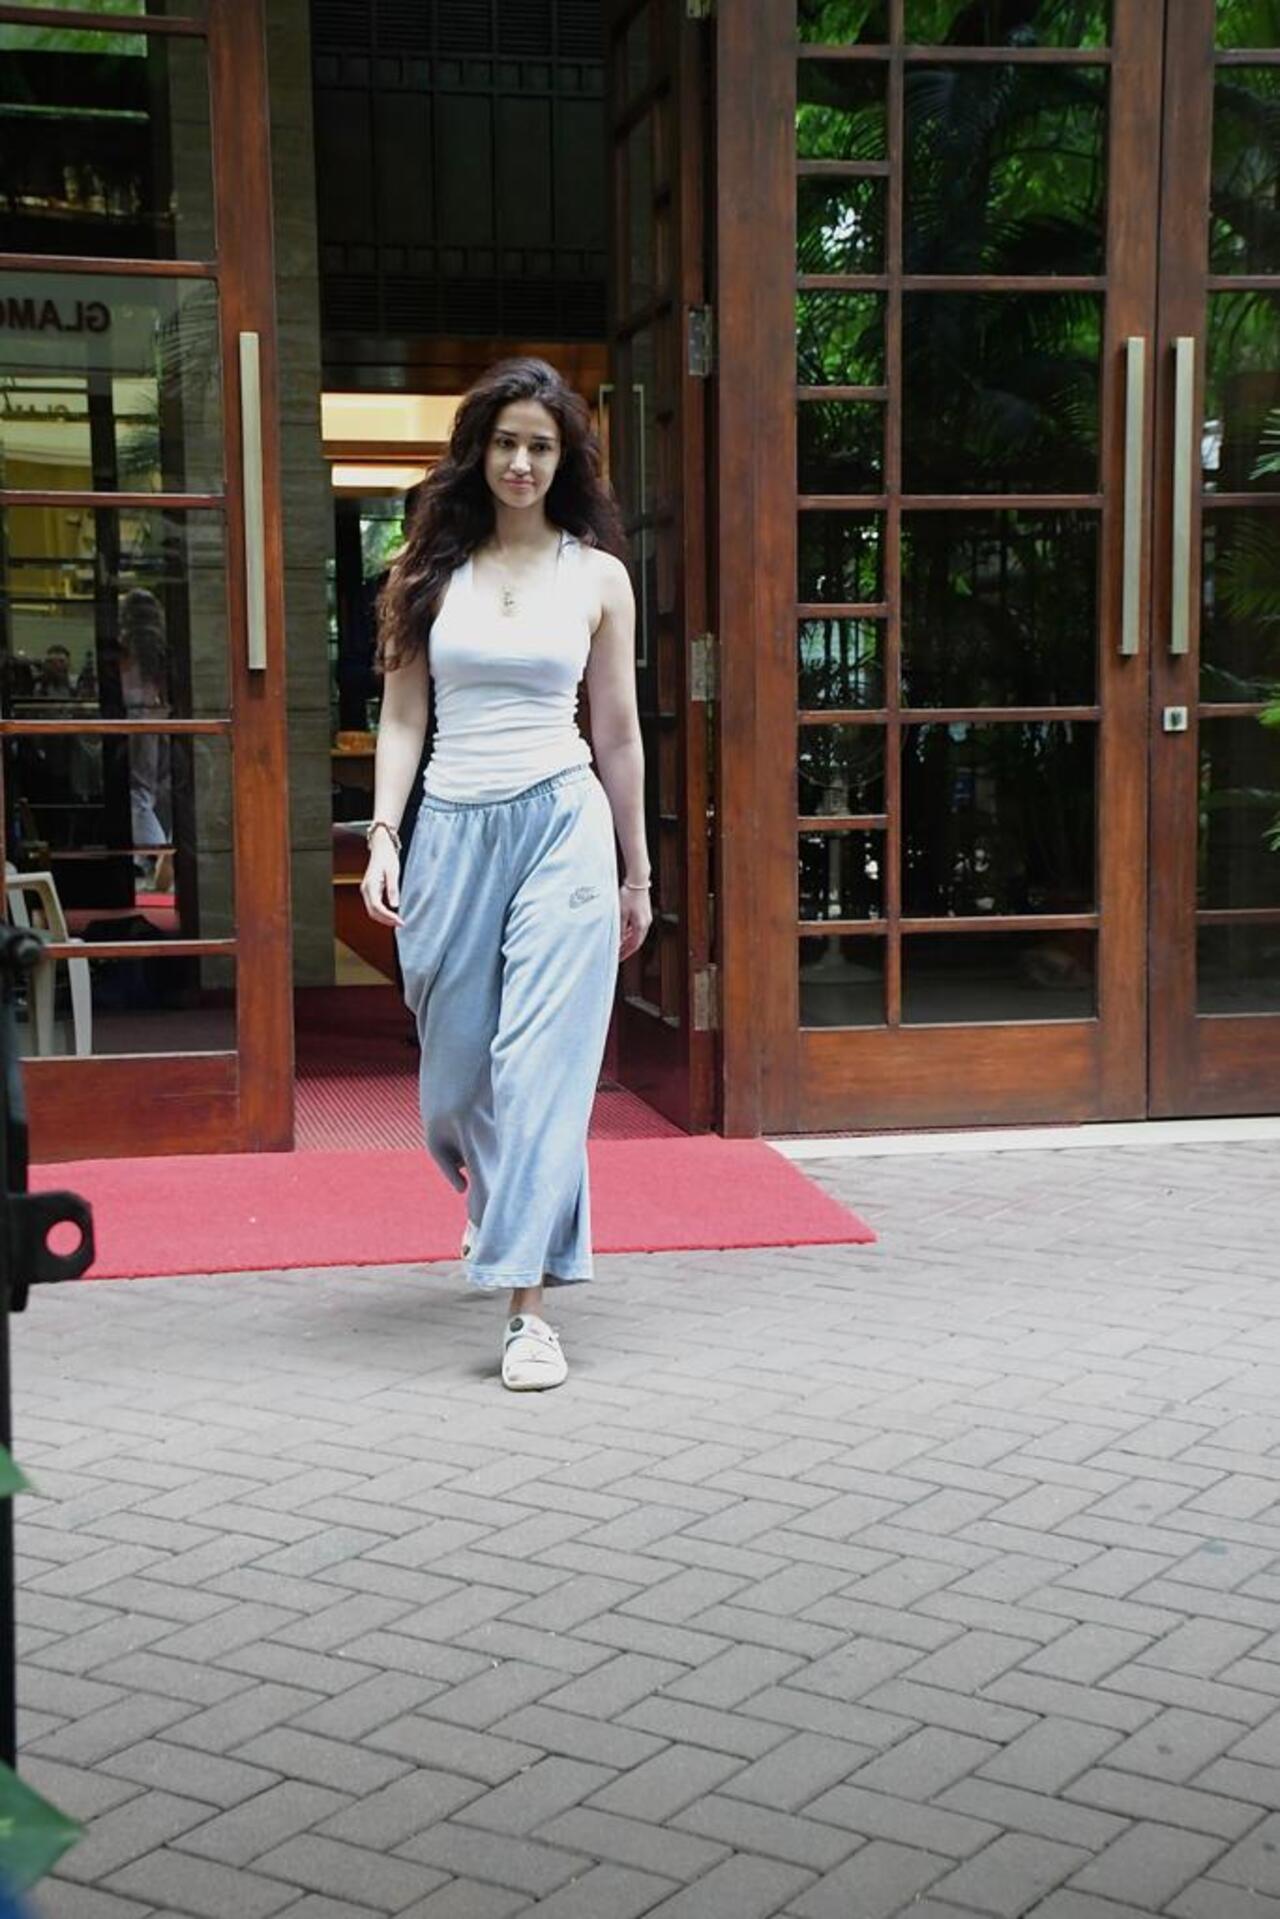 Disha Patani was spotted in the city. The actress was looking stunning in cool loose fits as she left her dance classes